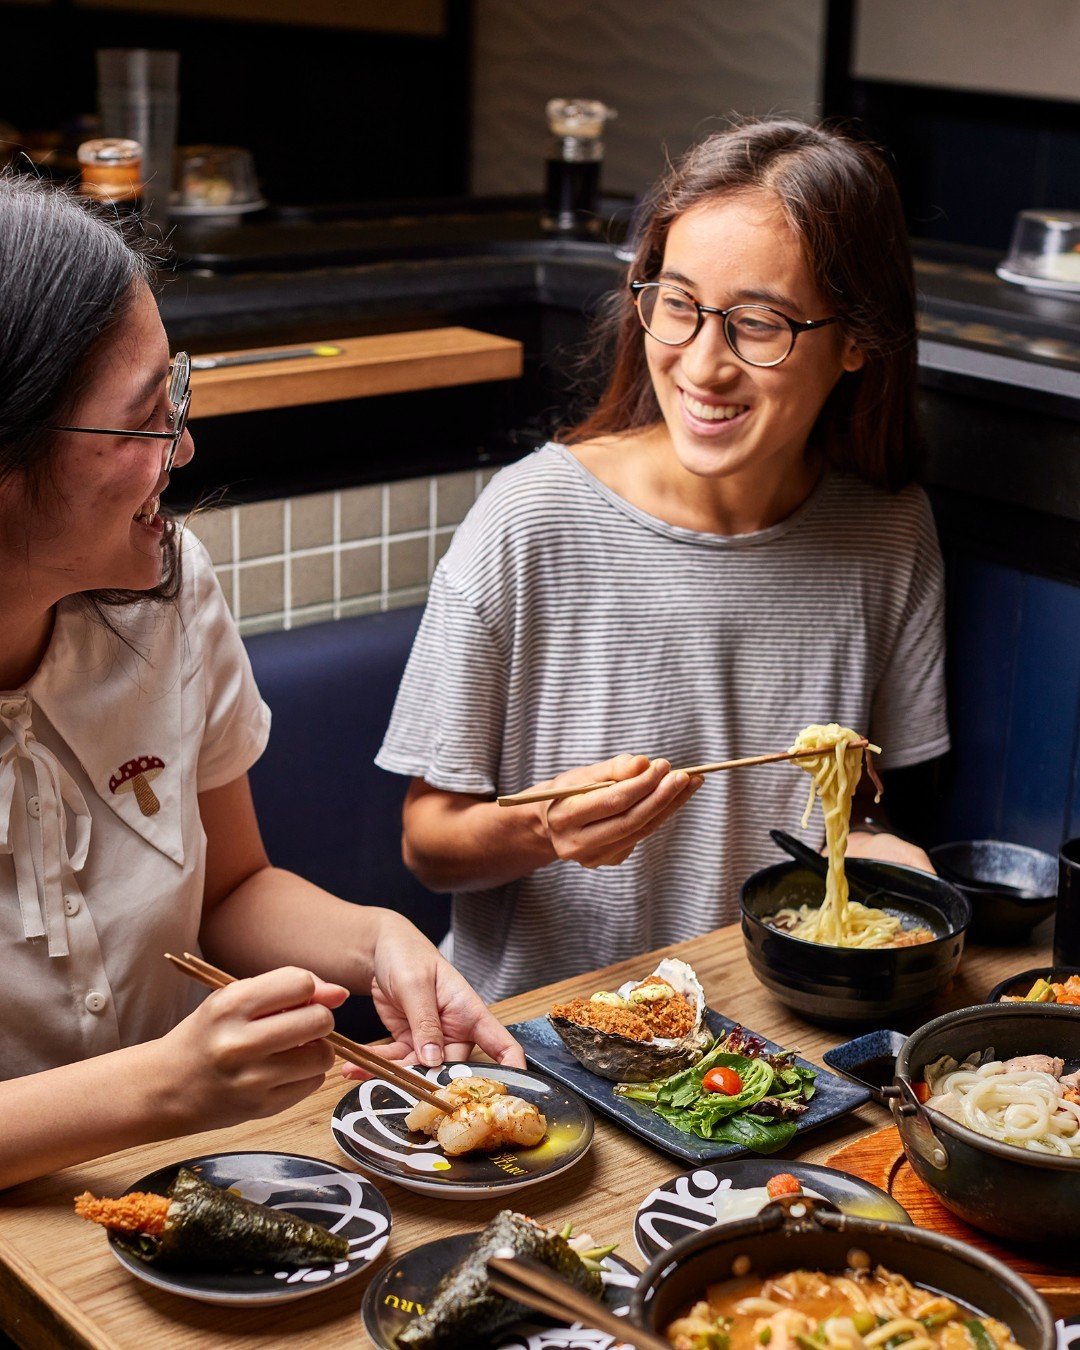 Got that hangry feeling? Don't worry, we've got the perfect fix for you! 

Swing by for some mouth-watering sushi and let's turn those frowns upside down with smiles all around. Because sushi + good vibes = instant mood boost 😊🍣 Try it for yourself